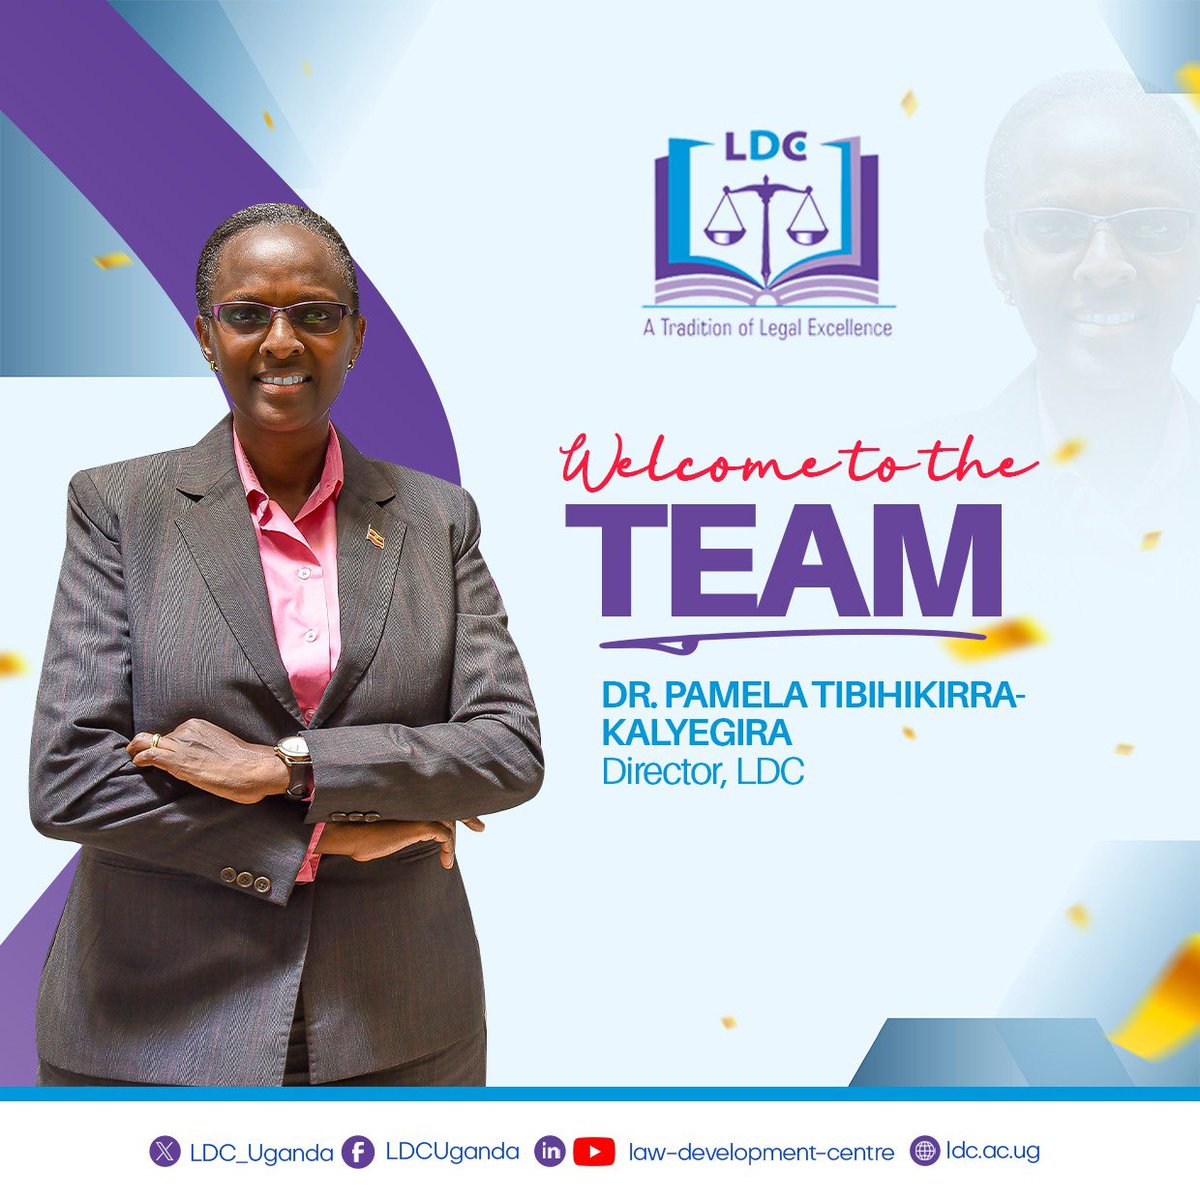 Join us in extending a warm welcome to Newly Appointed @DirectorLDC Dr. Pamela Tibihikirra-Kalyegira as newest addition to the LDC family! With her wealth of experience & expertise, we're excited to embark on this journey together towards greater heights of legal education. 🌟